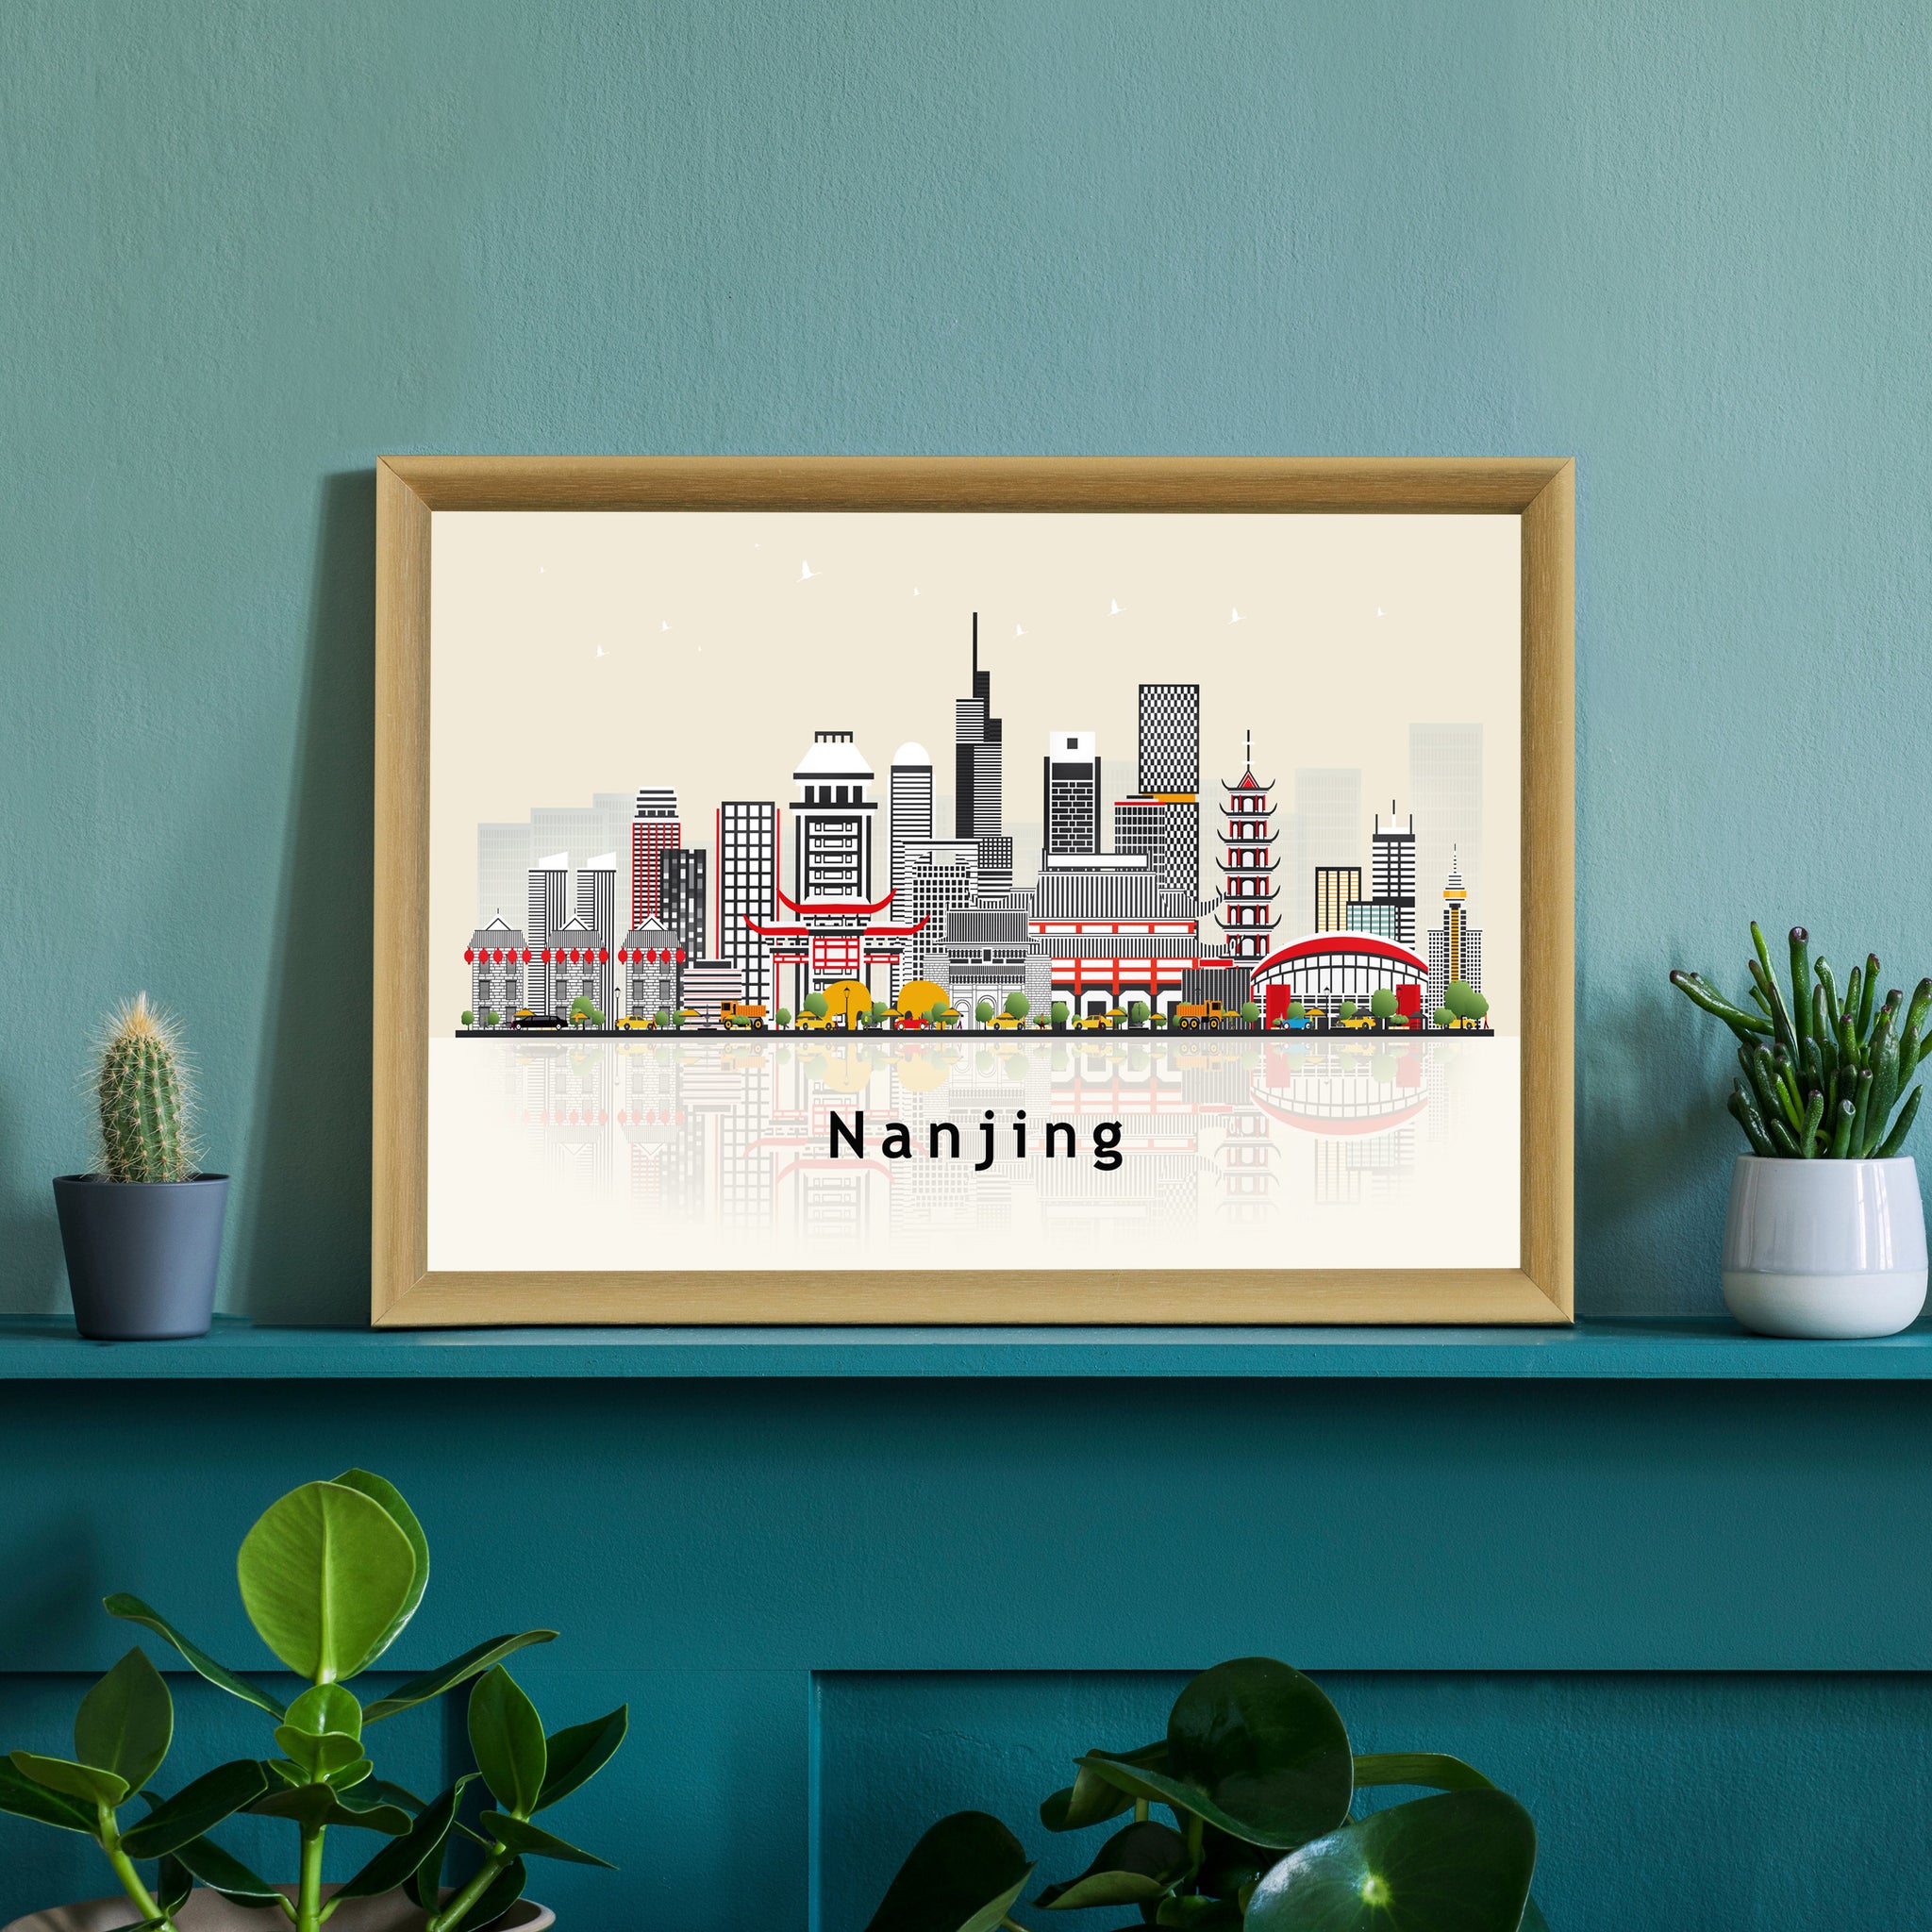 NANJING CHINA Illustration skyline poster, Modern skyline cityscape poster, China city skyline landmark map poster, Home wall decoration